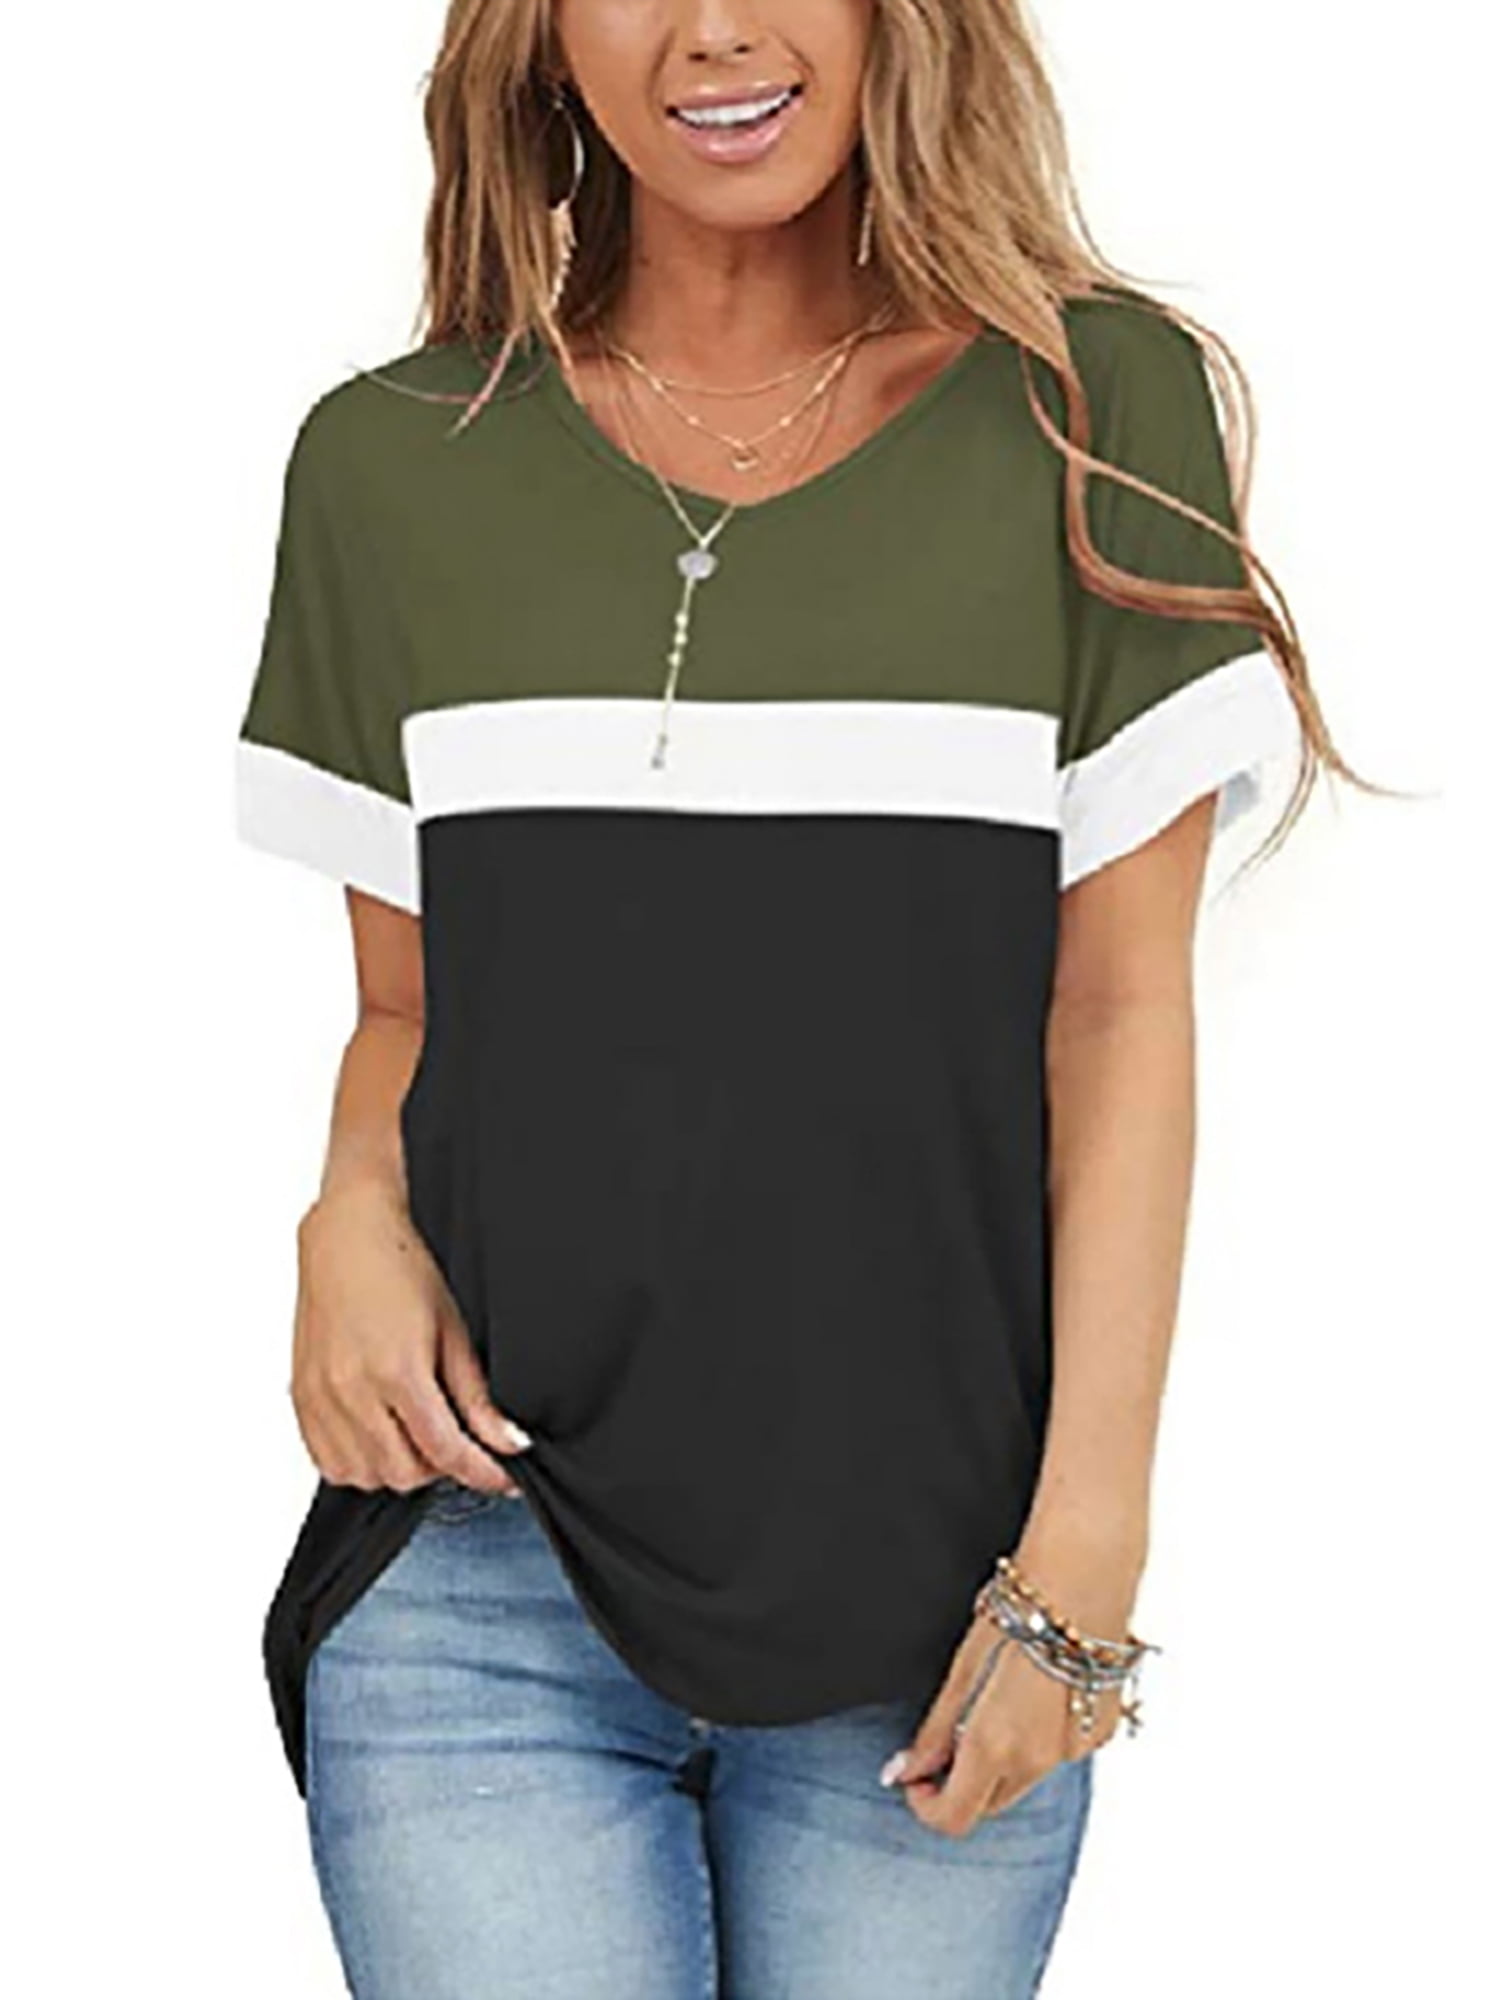 Women's V-Neck Loose Short Sleeve Blouse Light weight Tunic Casual Top T-Shirt 